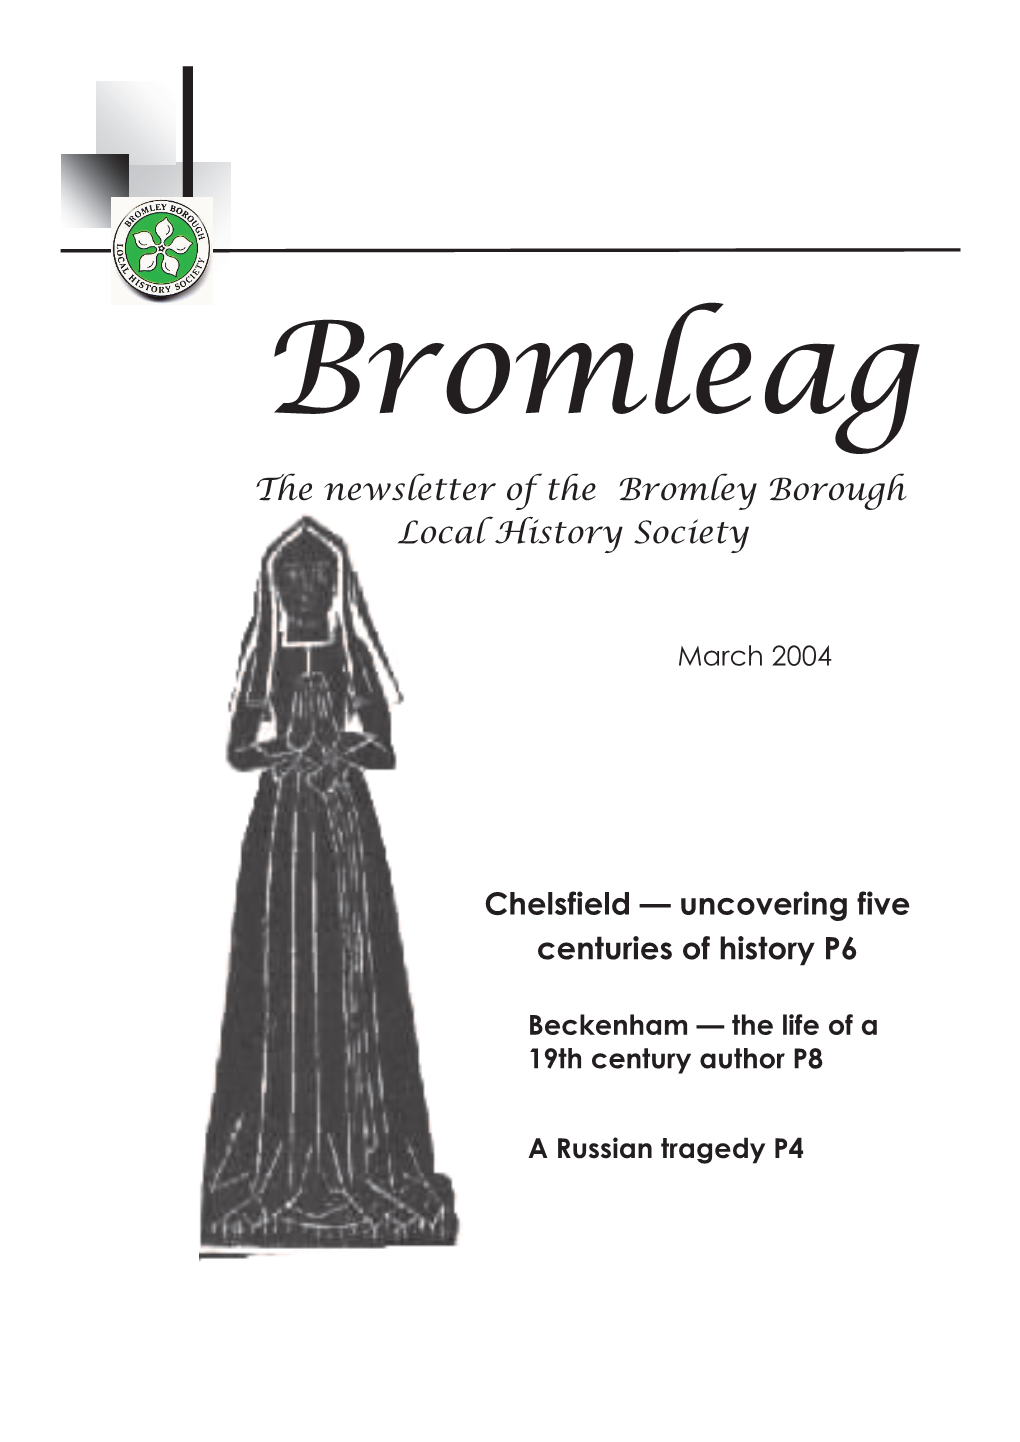 Chelsfield — Uncovering Five Centuries of History P6 the Newsletter of the Bromley Borough Local History Society